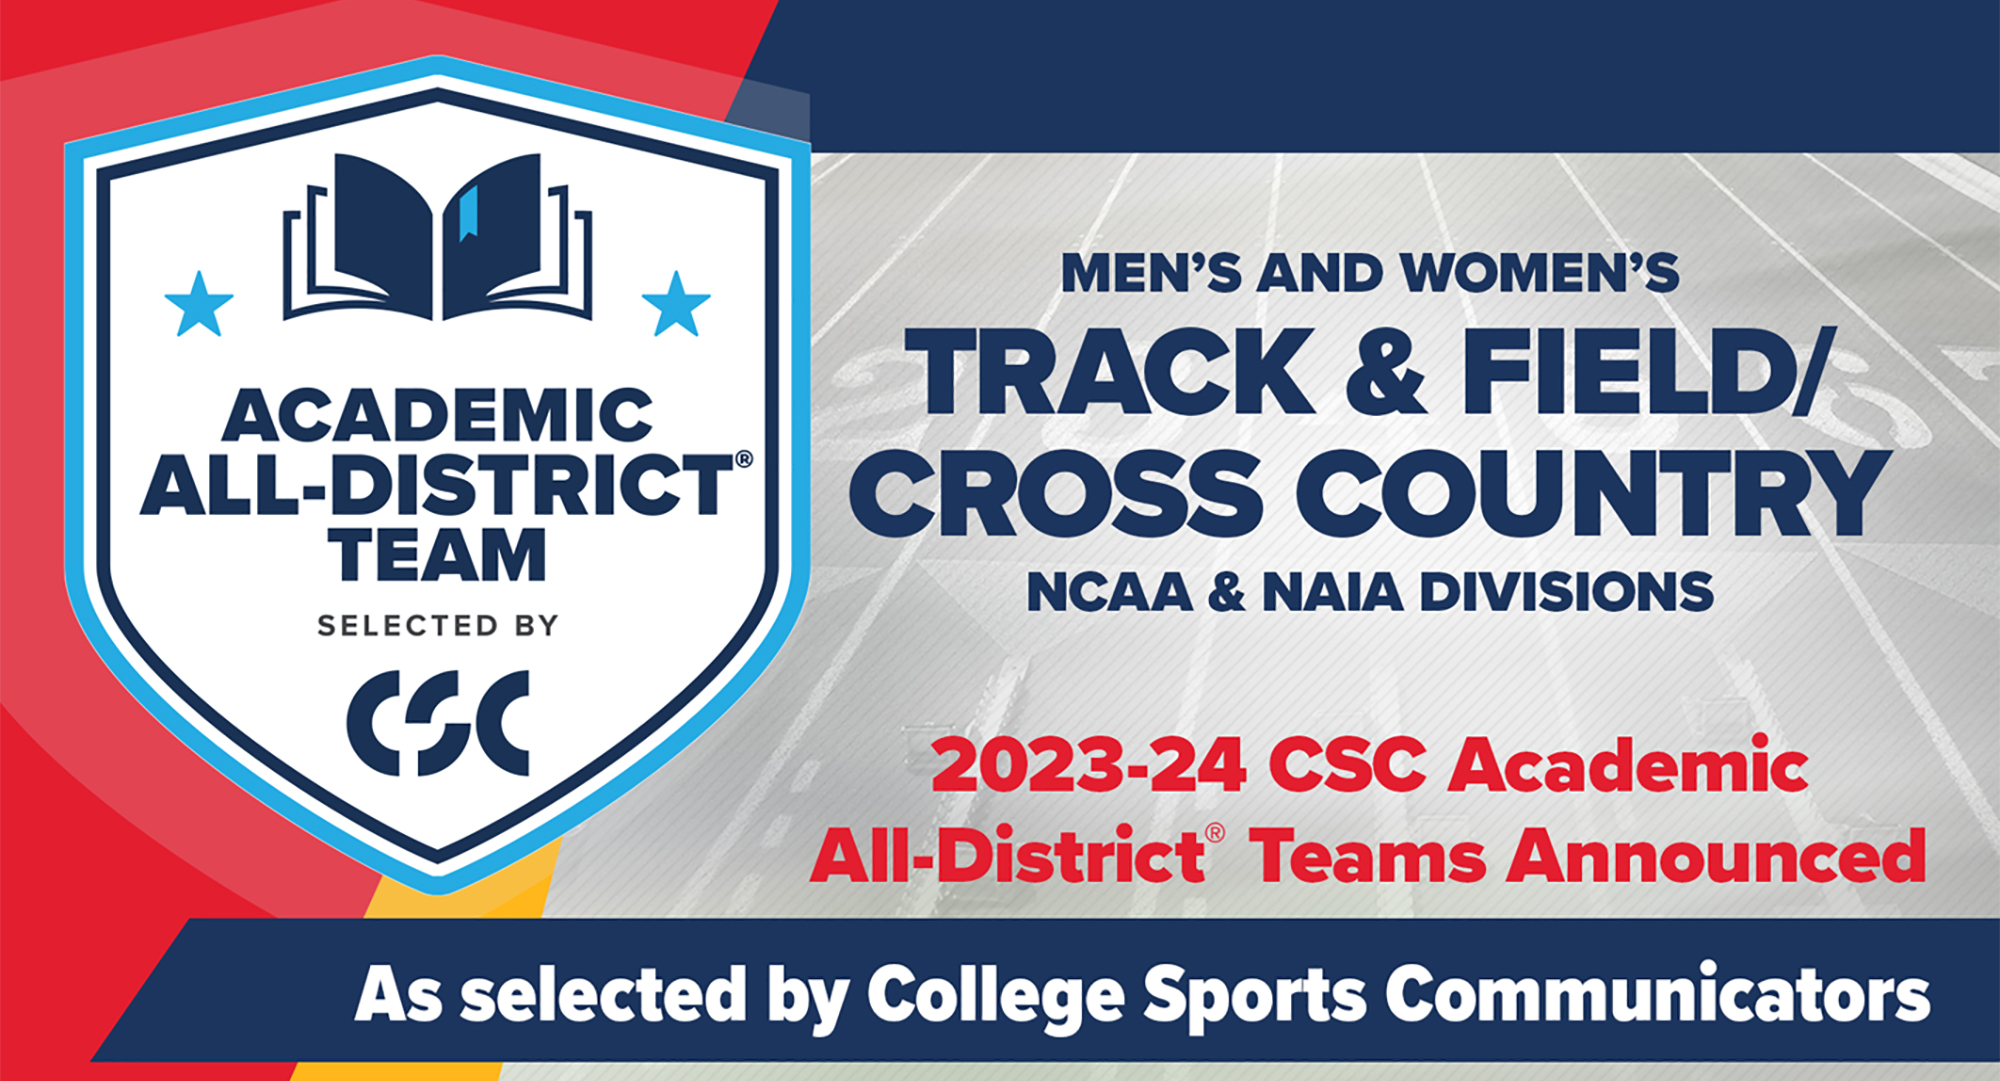 Maddie Guler, Drew Frolek, Jenna Kalevik, Emily Rengo and Meg Shercliffe all claimed CSC Academic  All-District honors.